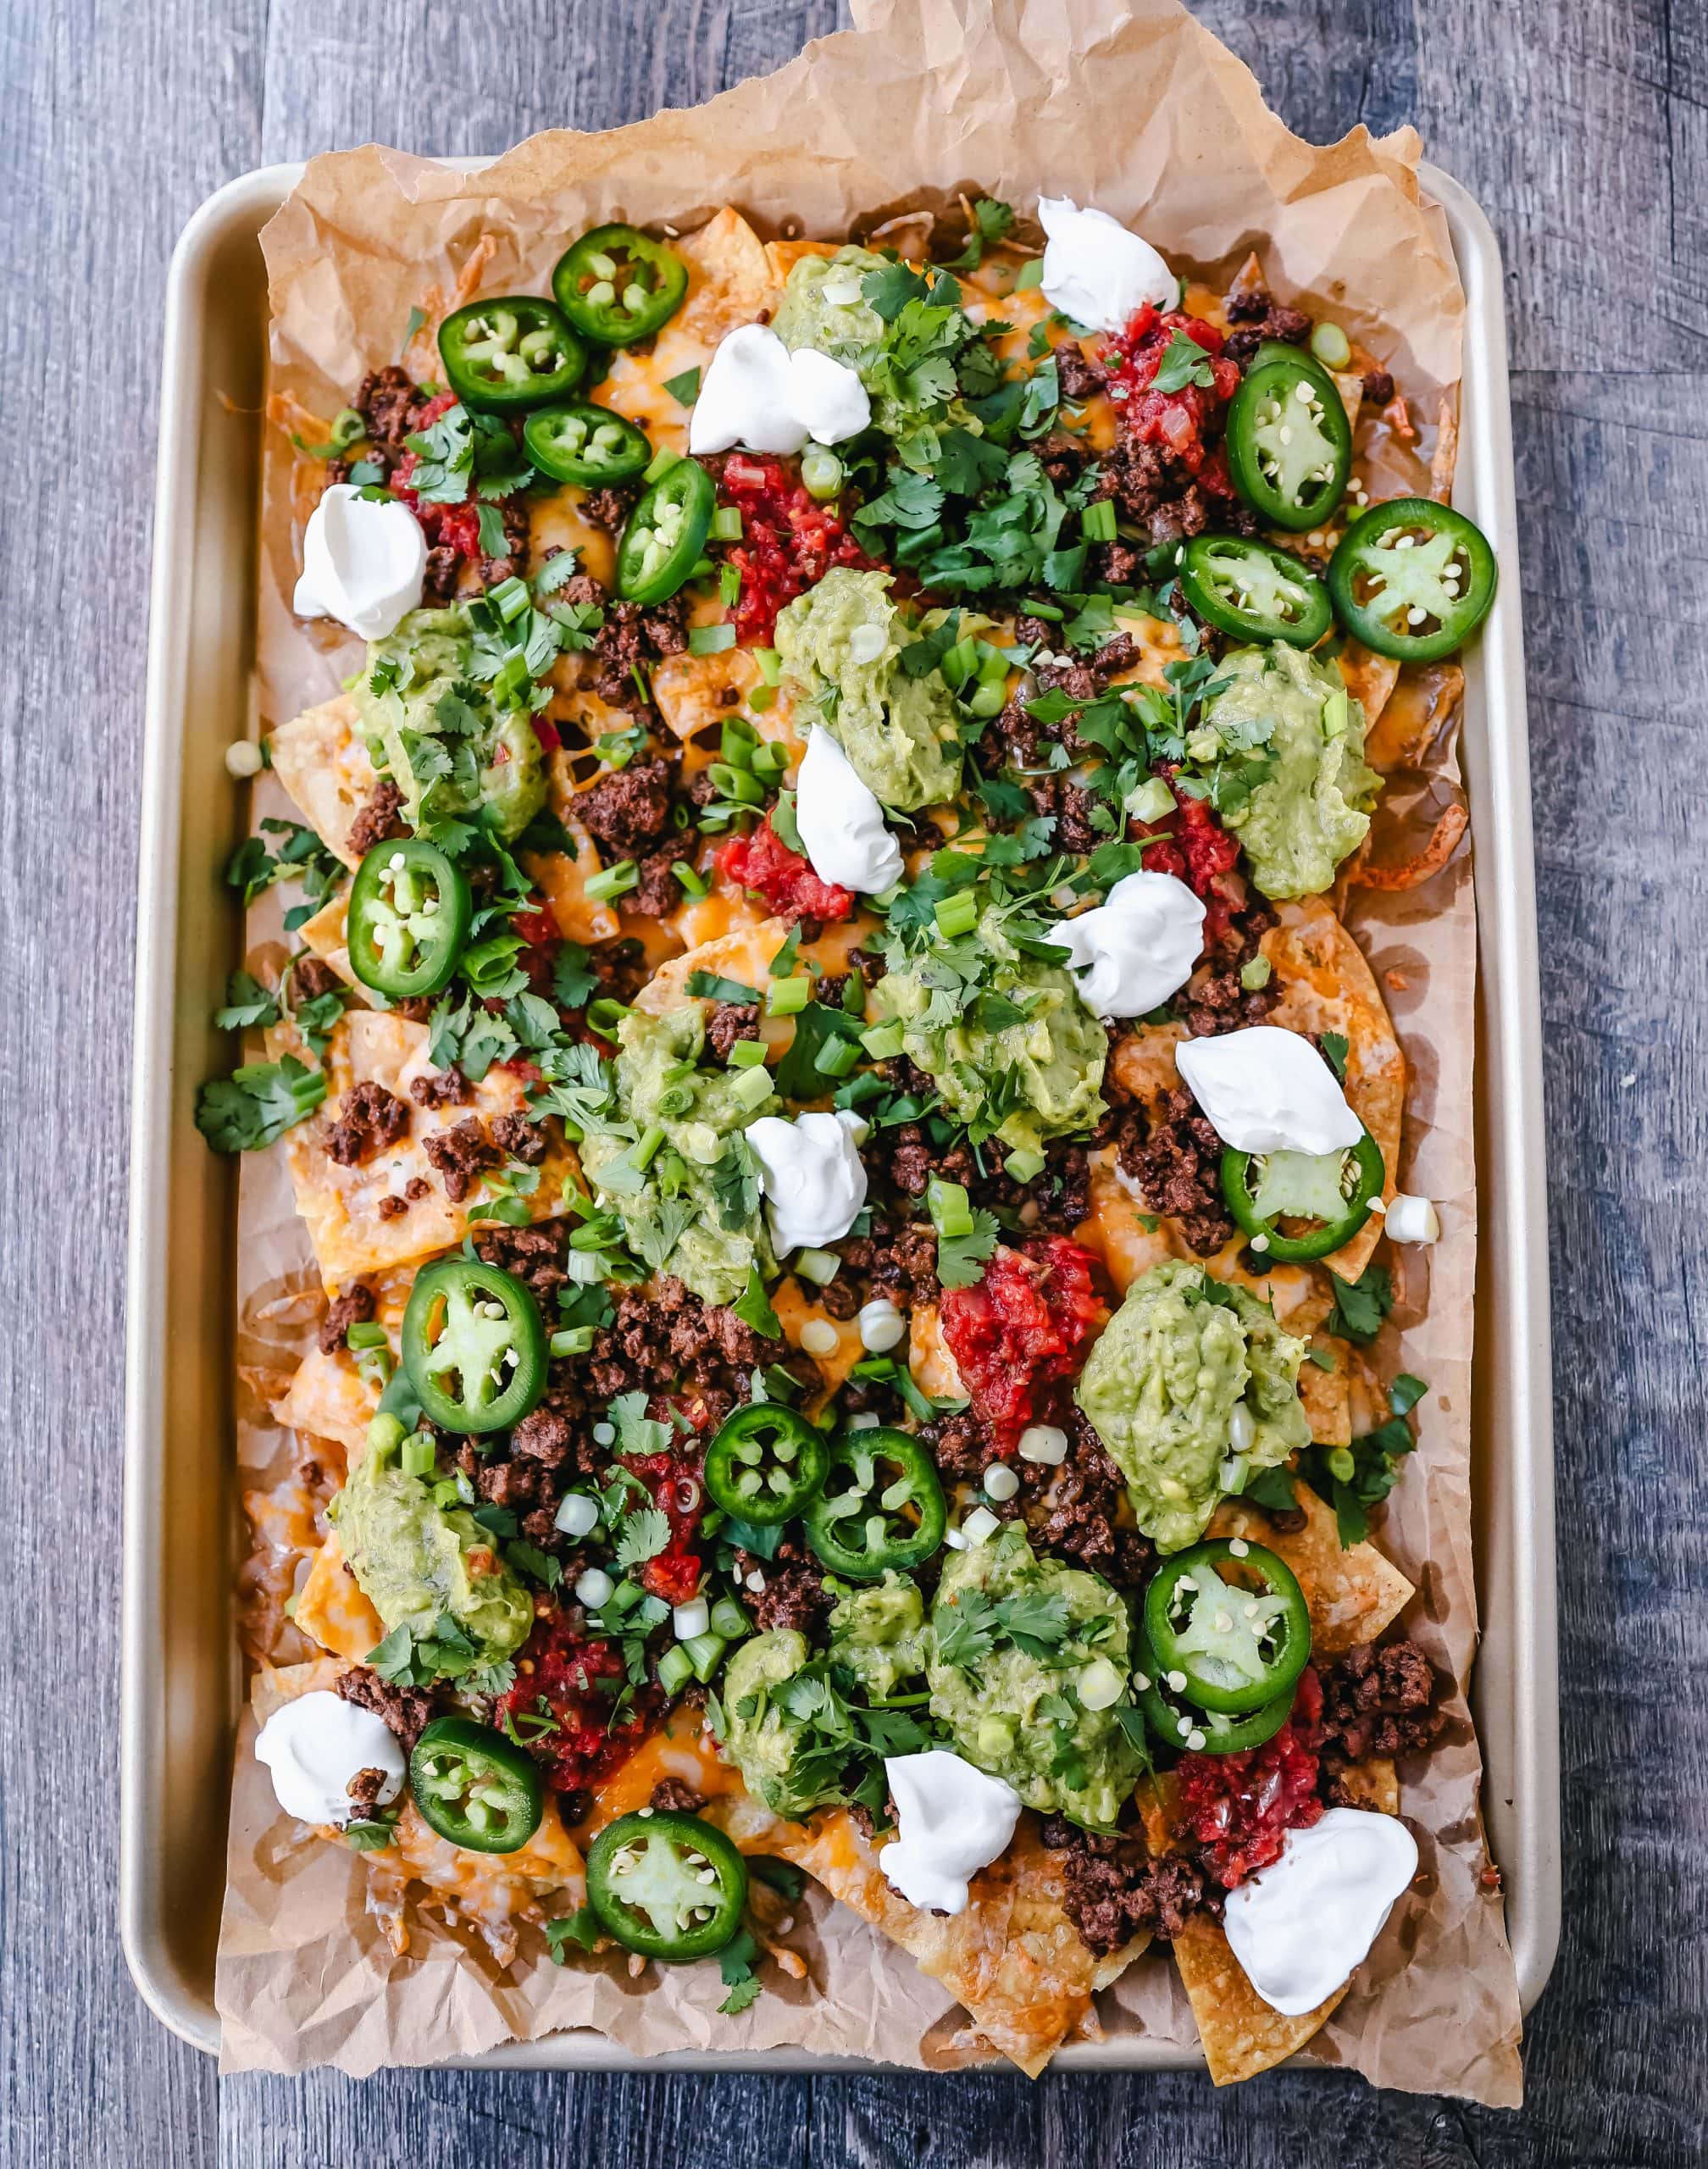 Ground Beef Nachos Recipe  Seasoned ground beef with crispy tortilla chips, Mexican cheeses, fresh guacamole, sour cream, jalapenos, fresh salsa, green onions, and cilantro make the best beef nachos!